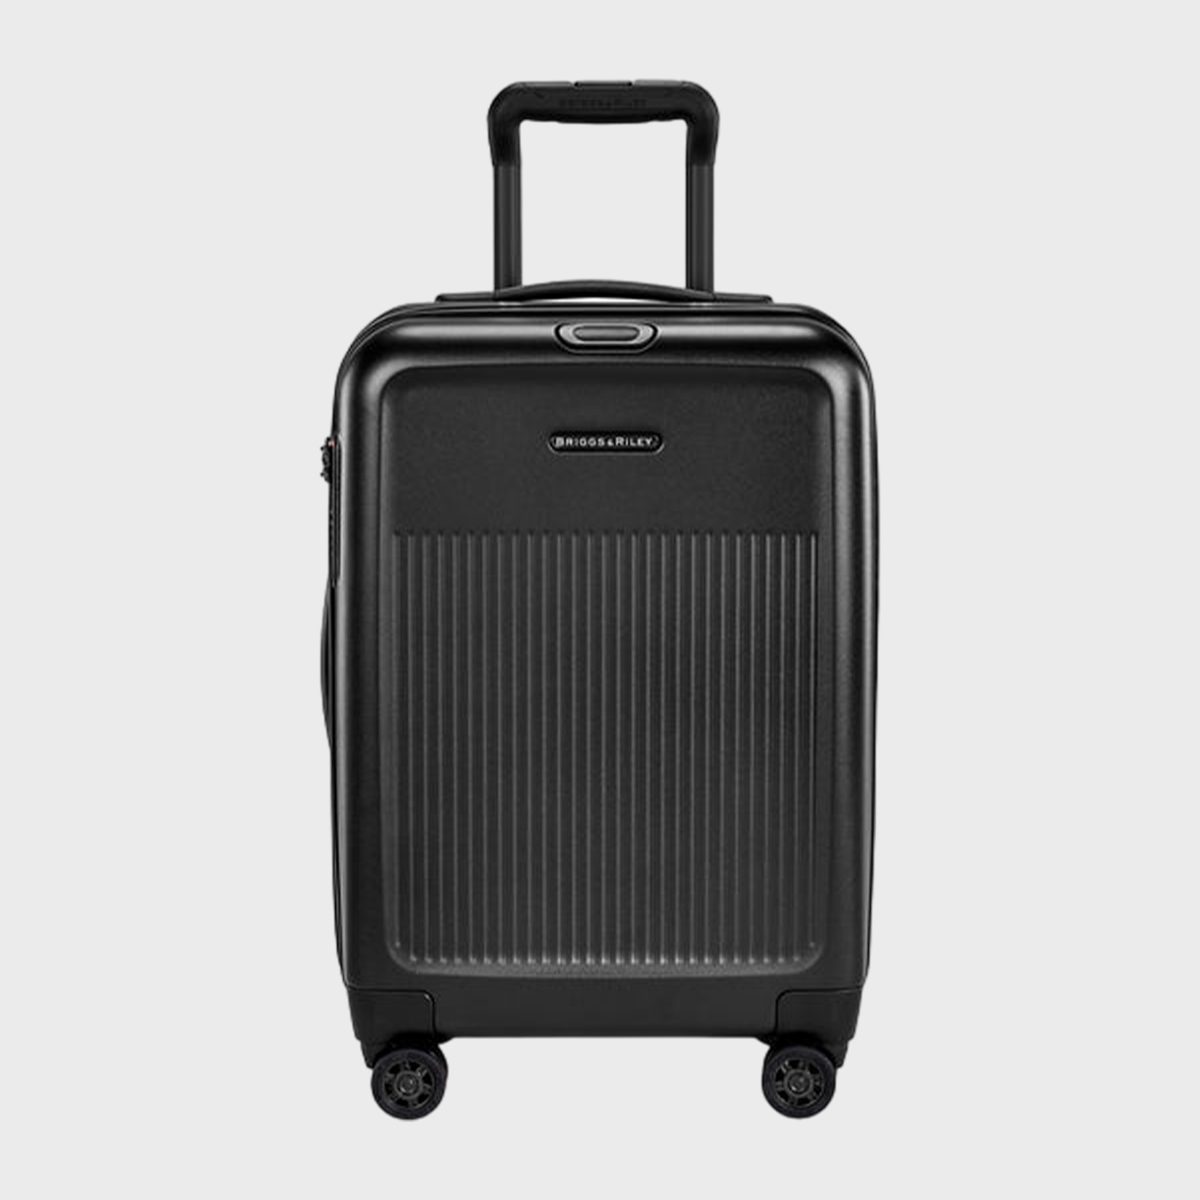 <h3>Briggs & Riley International Carry-on Expandable Spinner</h3> <p>This <a href="https://www.briggs-riley.com/collections/sympatico/products/international-carry-on-expandable-spinner-su221cxsp" rel="noopener">Briggs & Riley luggage carry-on</a> is expandable, providing up to 22 percent more packing space—making it a solid choice for longer <a href="https://www.rd.com/list/things-never-to-forget-when-traveling-overseas/" rel="noopener noreferrer">international flights</a>. It's also equipped with a built-in power bank and lock, both of which are TSA-approved. Its lightweight polycarbonate exterior offers resilience, too. Plus, the protective drawstring fabric bag helps keep your suitcase in top shape between travels.</p> <p>Verified buyer Mari L. writes, "This is my second Briggs & Riley luggage. I wanted a carry-on and with no hesitation, I knew I wanted Briggs & Riley. This carry-on luggage expands to add more clothing and compress to its original size. I LOVE it!! I also love that you can place your portable charger and your phone outside of the luggage for easy access."</p> <p><strong>Pros</strong></p> <ul> <li>Designed for international travel</li> <li>Expansion-compression system increases packing capacity</li> <li>Mesh and zip pockets for optimal storage</li> <li>Lifetime warranty</li> <li>Monogramming available</li> </ul> <p><strong>Cons</strong></p> <ul> <li>At nearly $600, this suitcase is a splurge</li> <li>Limited color options</li> </ul> <p class="listicle-page__cta-button-shop"><a class="shop-btn" href="https://www.briggs-riley.com/collections/sympatico/products/international-carry-on-expandable-spinner-su221cxsp">Shop Now</a></p>